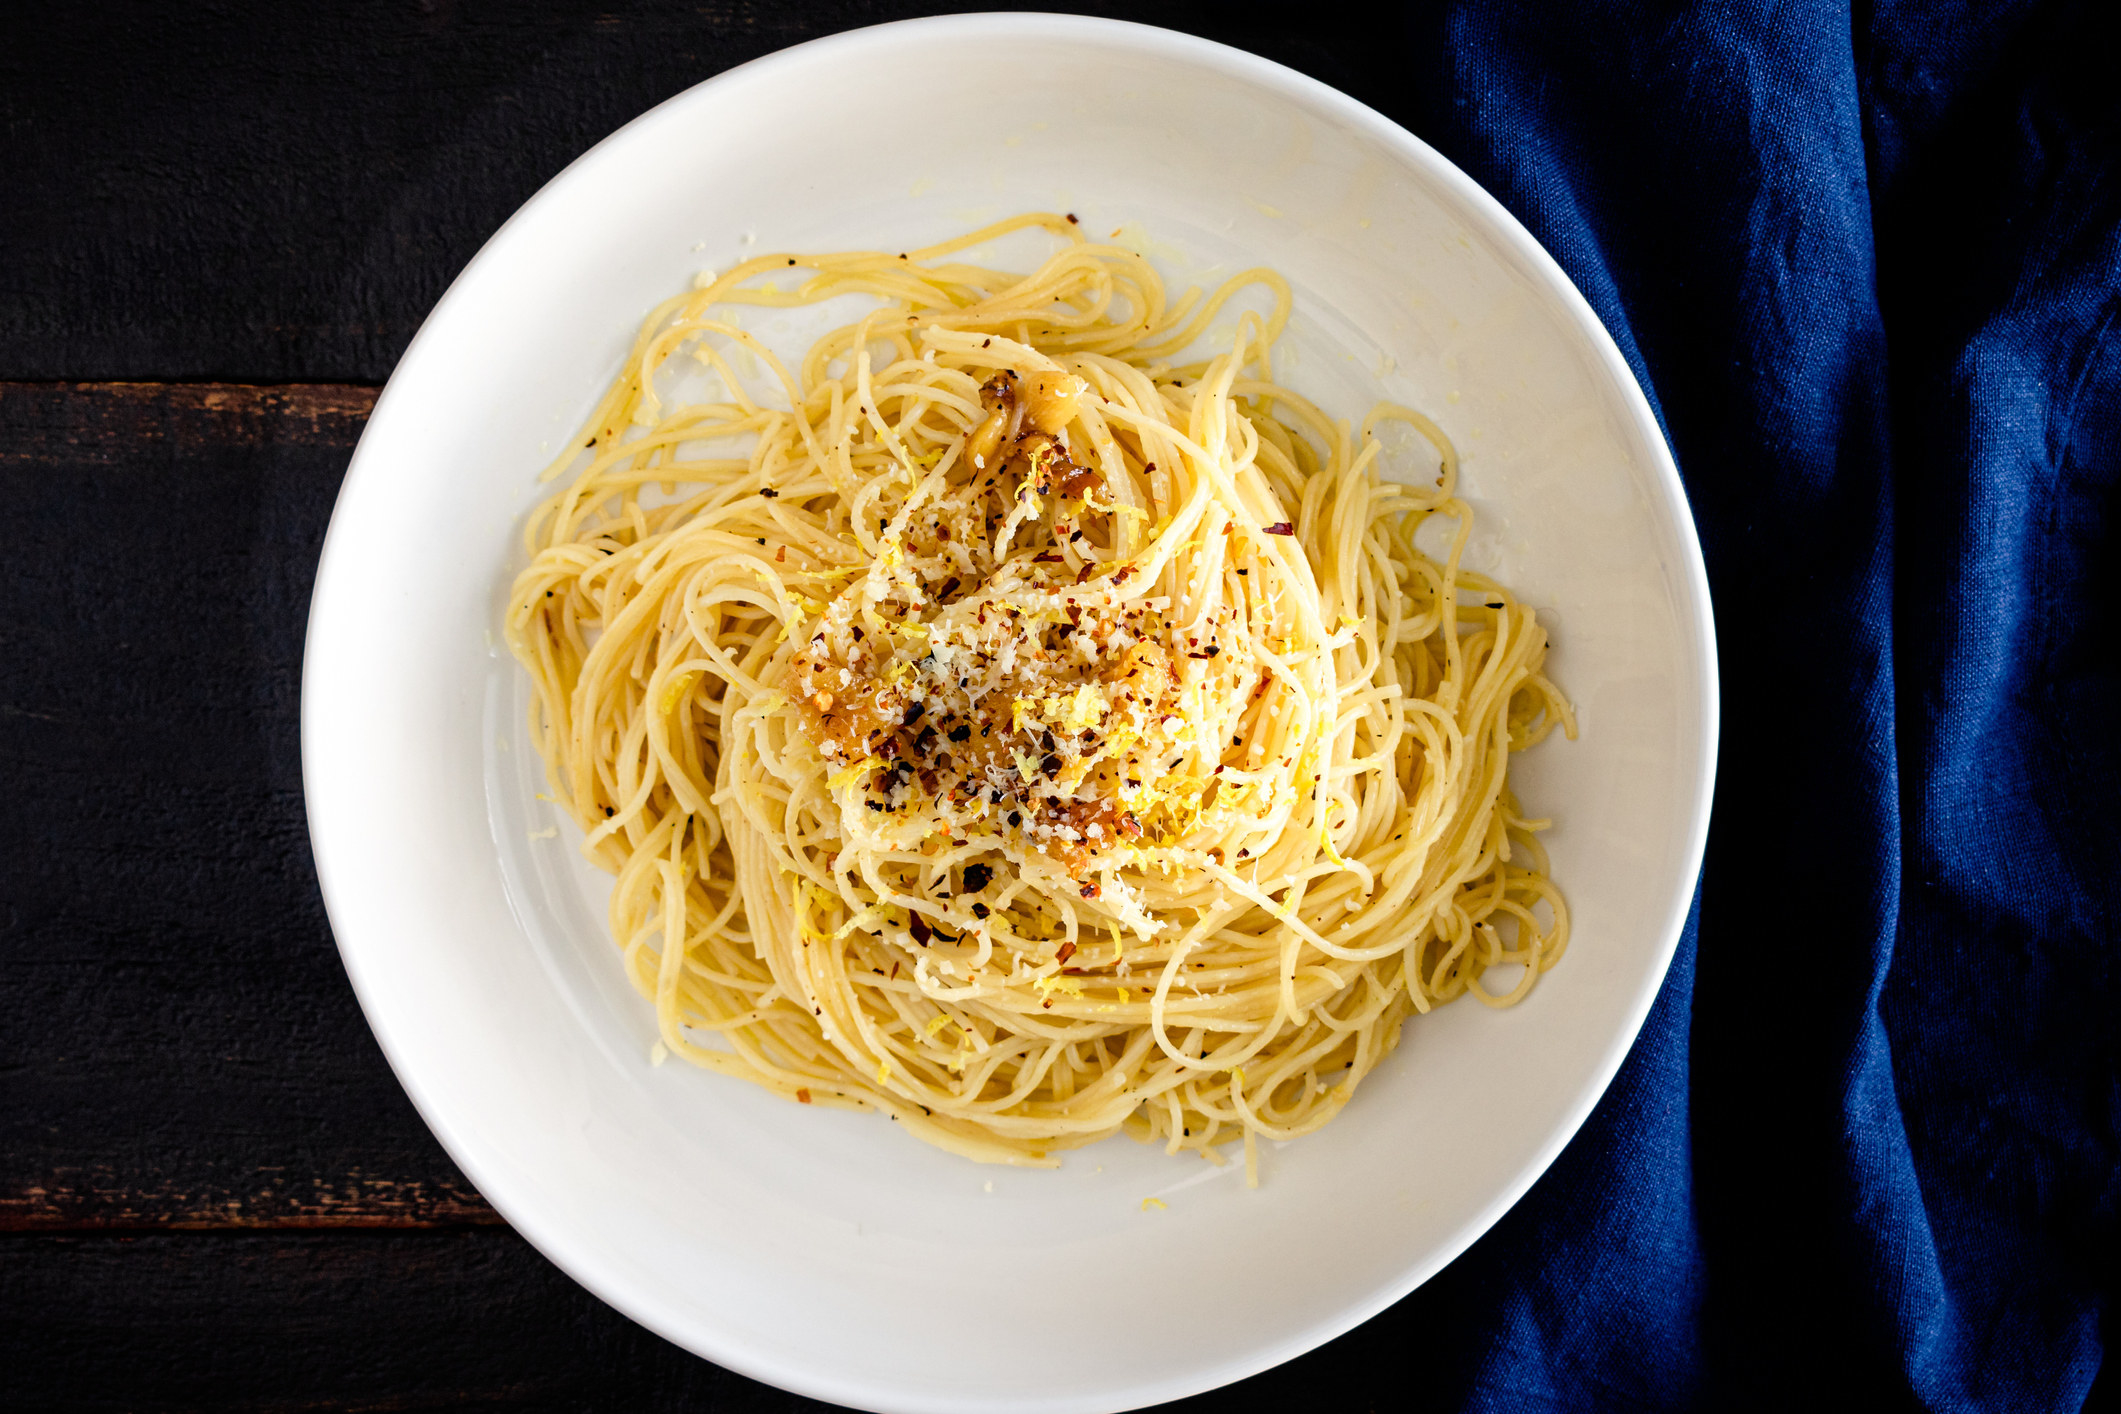 Bowl of pasta topped with red pepper flakes, Parmesan, and lemon zest.